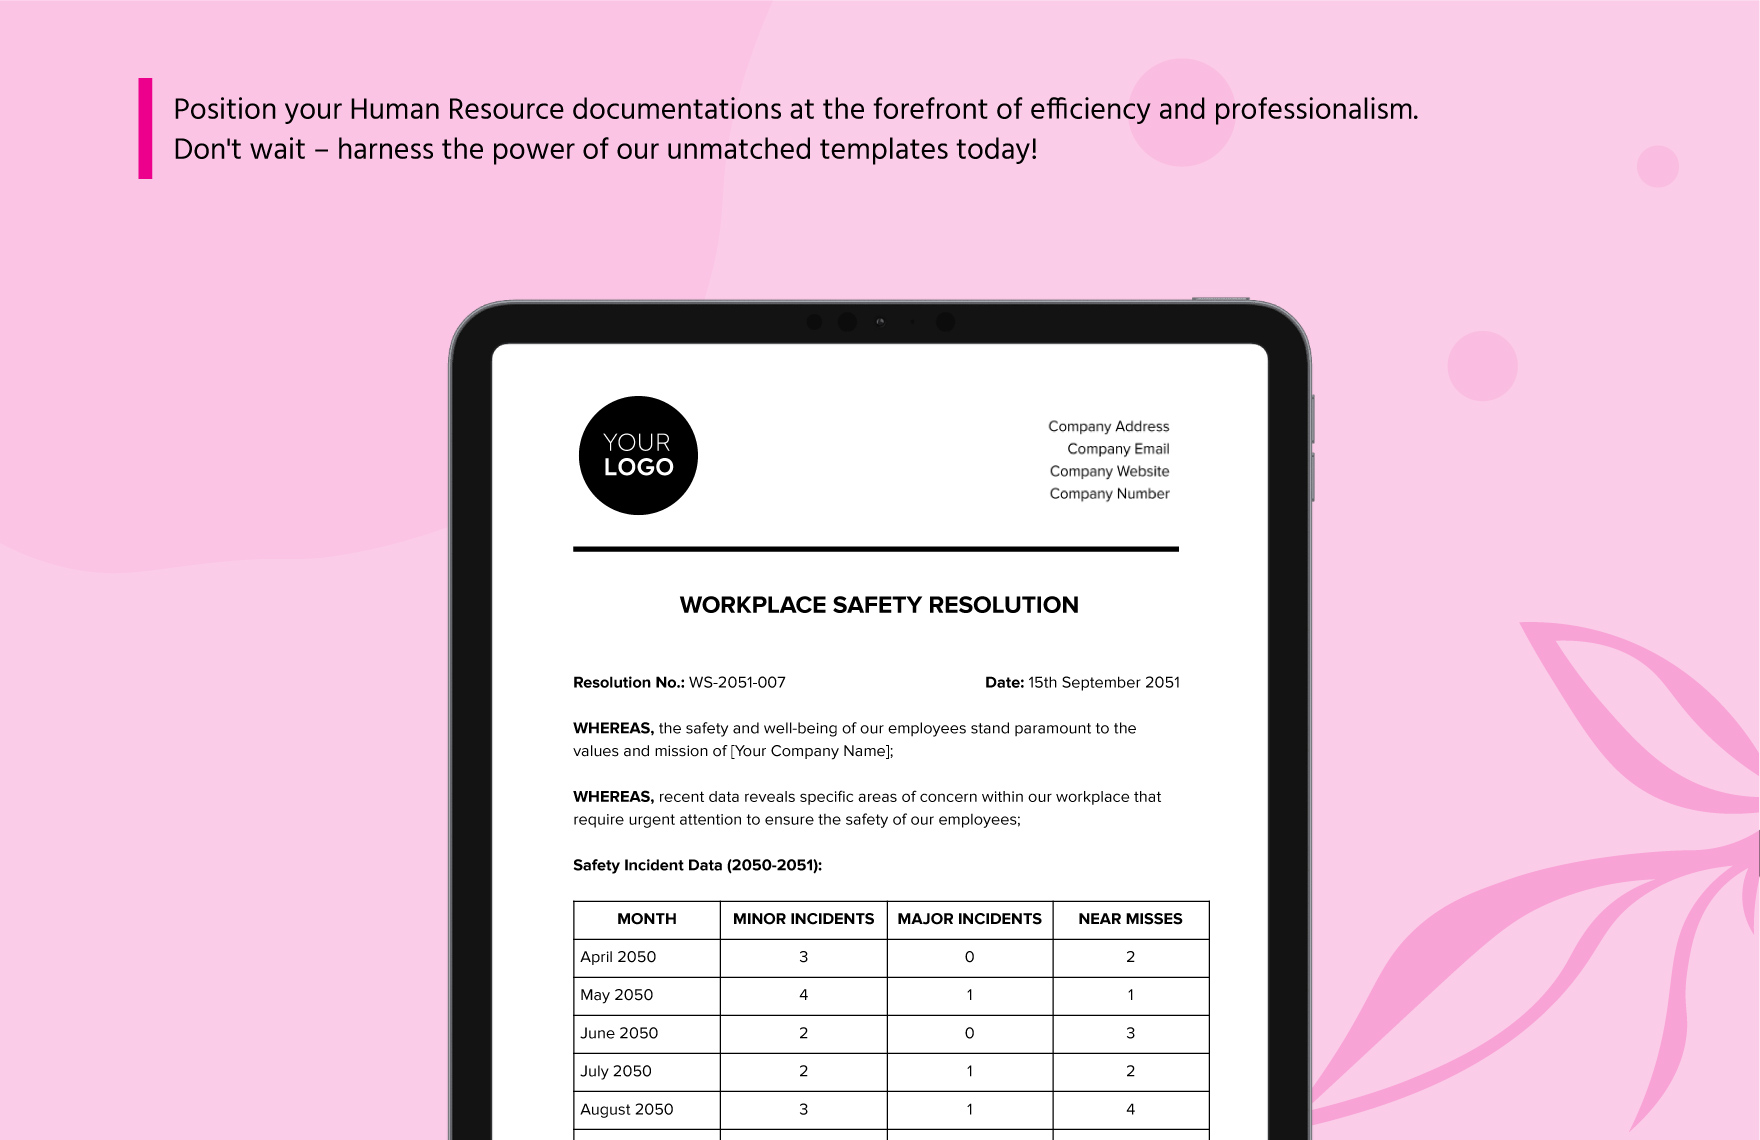 Workplace Safety Resolution HR Template